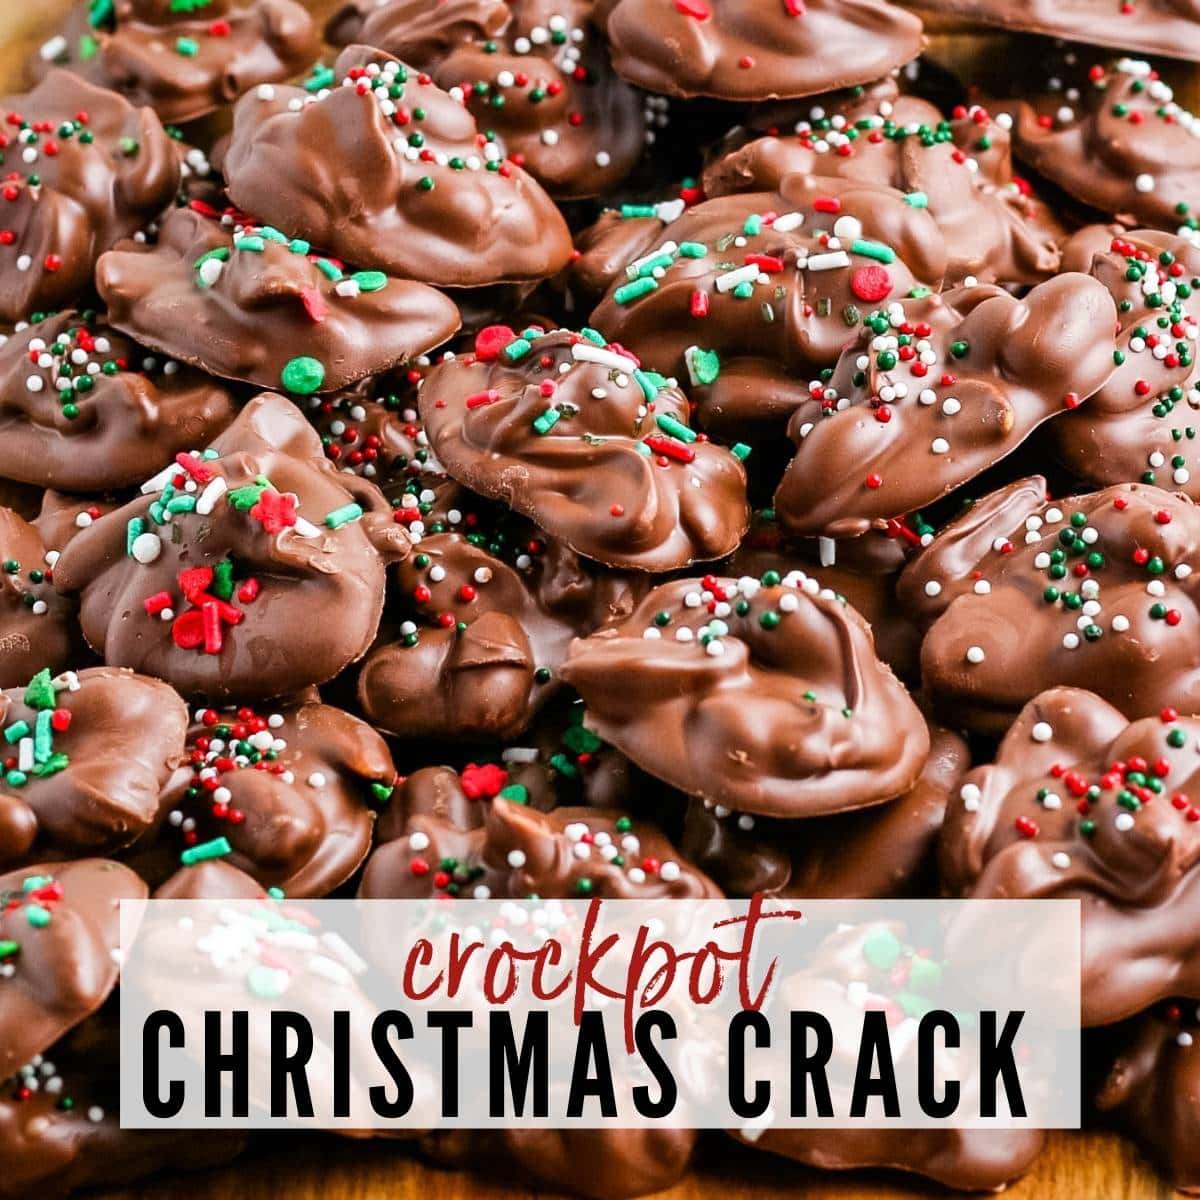 crockpot Christmas crack made with chocolate, peanuts and holiday sprinkles with text overlay